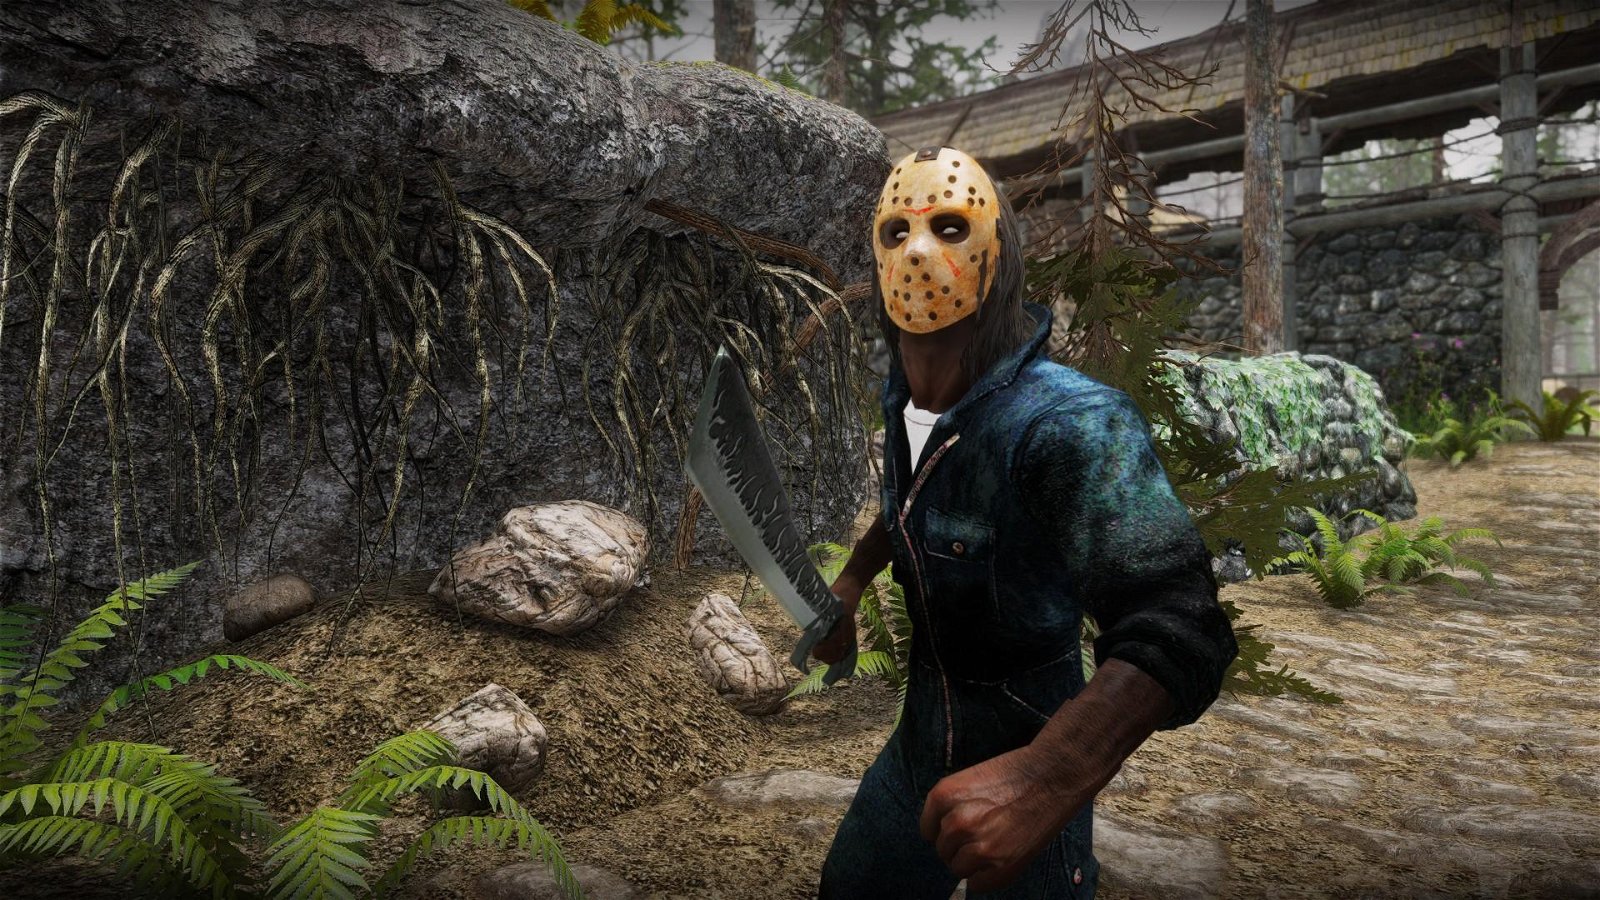 Friday the 13th: The Game Nexus - Mods and Community